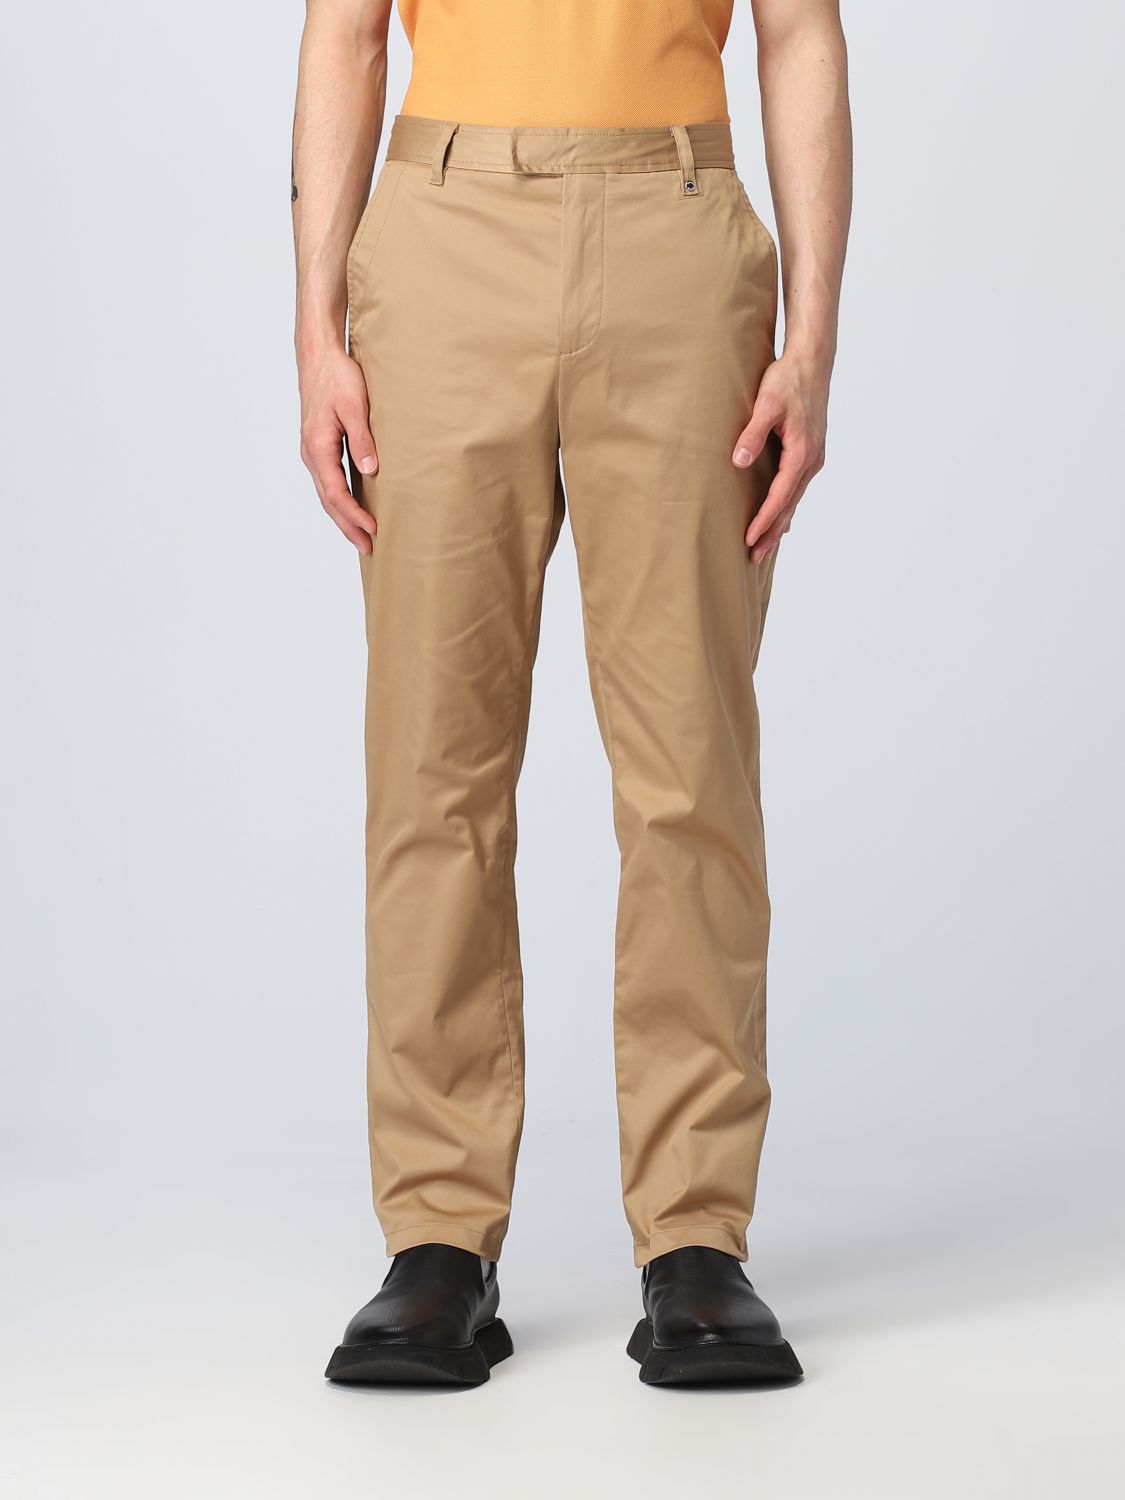 BURBERRY: pants for man - Beige | Burberry pants 8055173 online on  